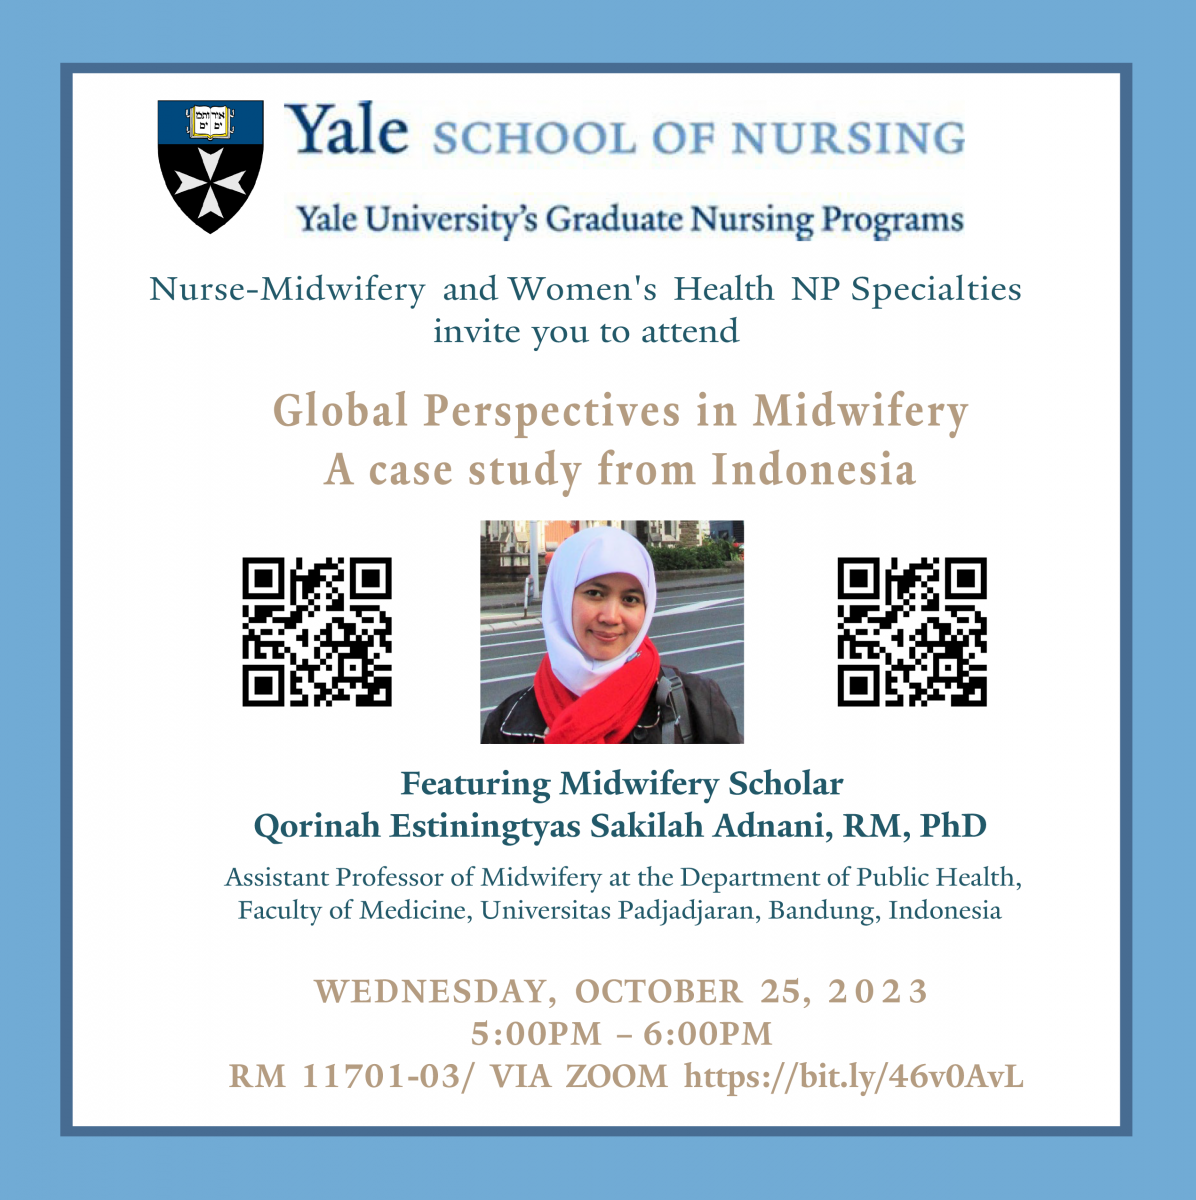 Global Perspectives in Midwifery A case study from Indonesia